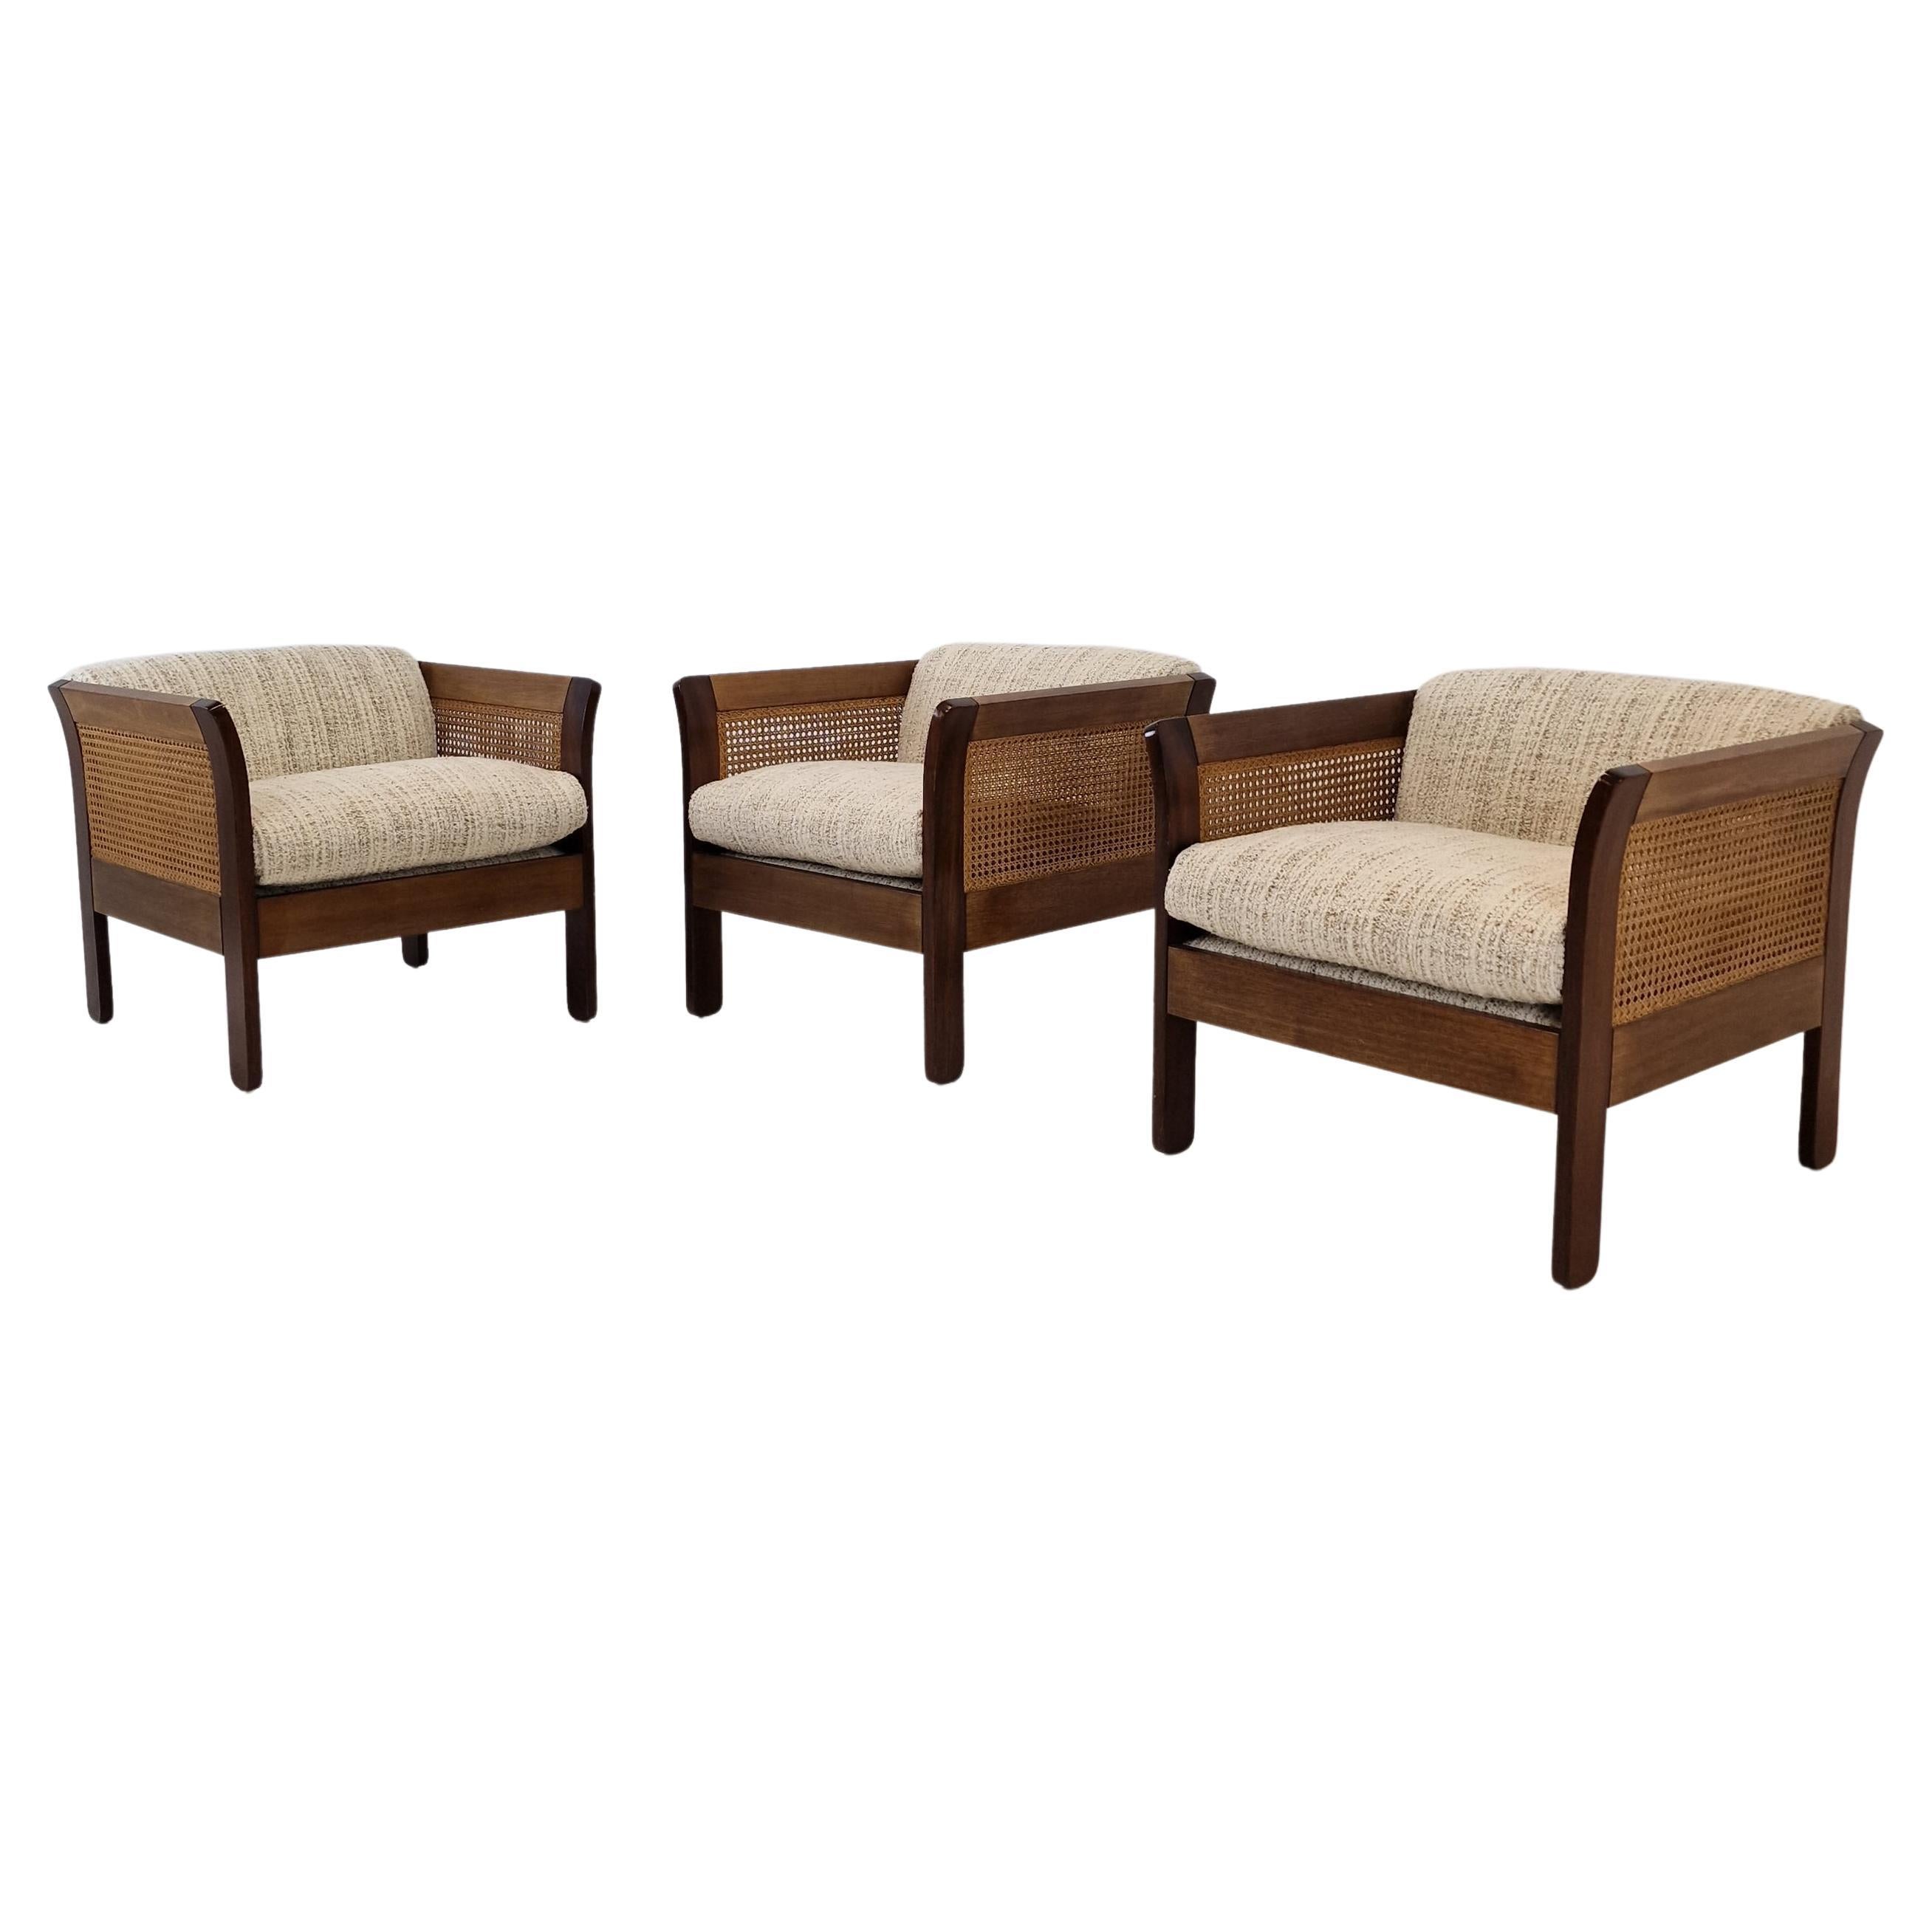 Midcentury Set of 3 Italian Wood with Rattan Club Chairs, 1960s